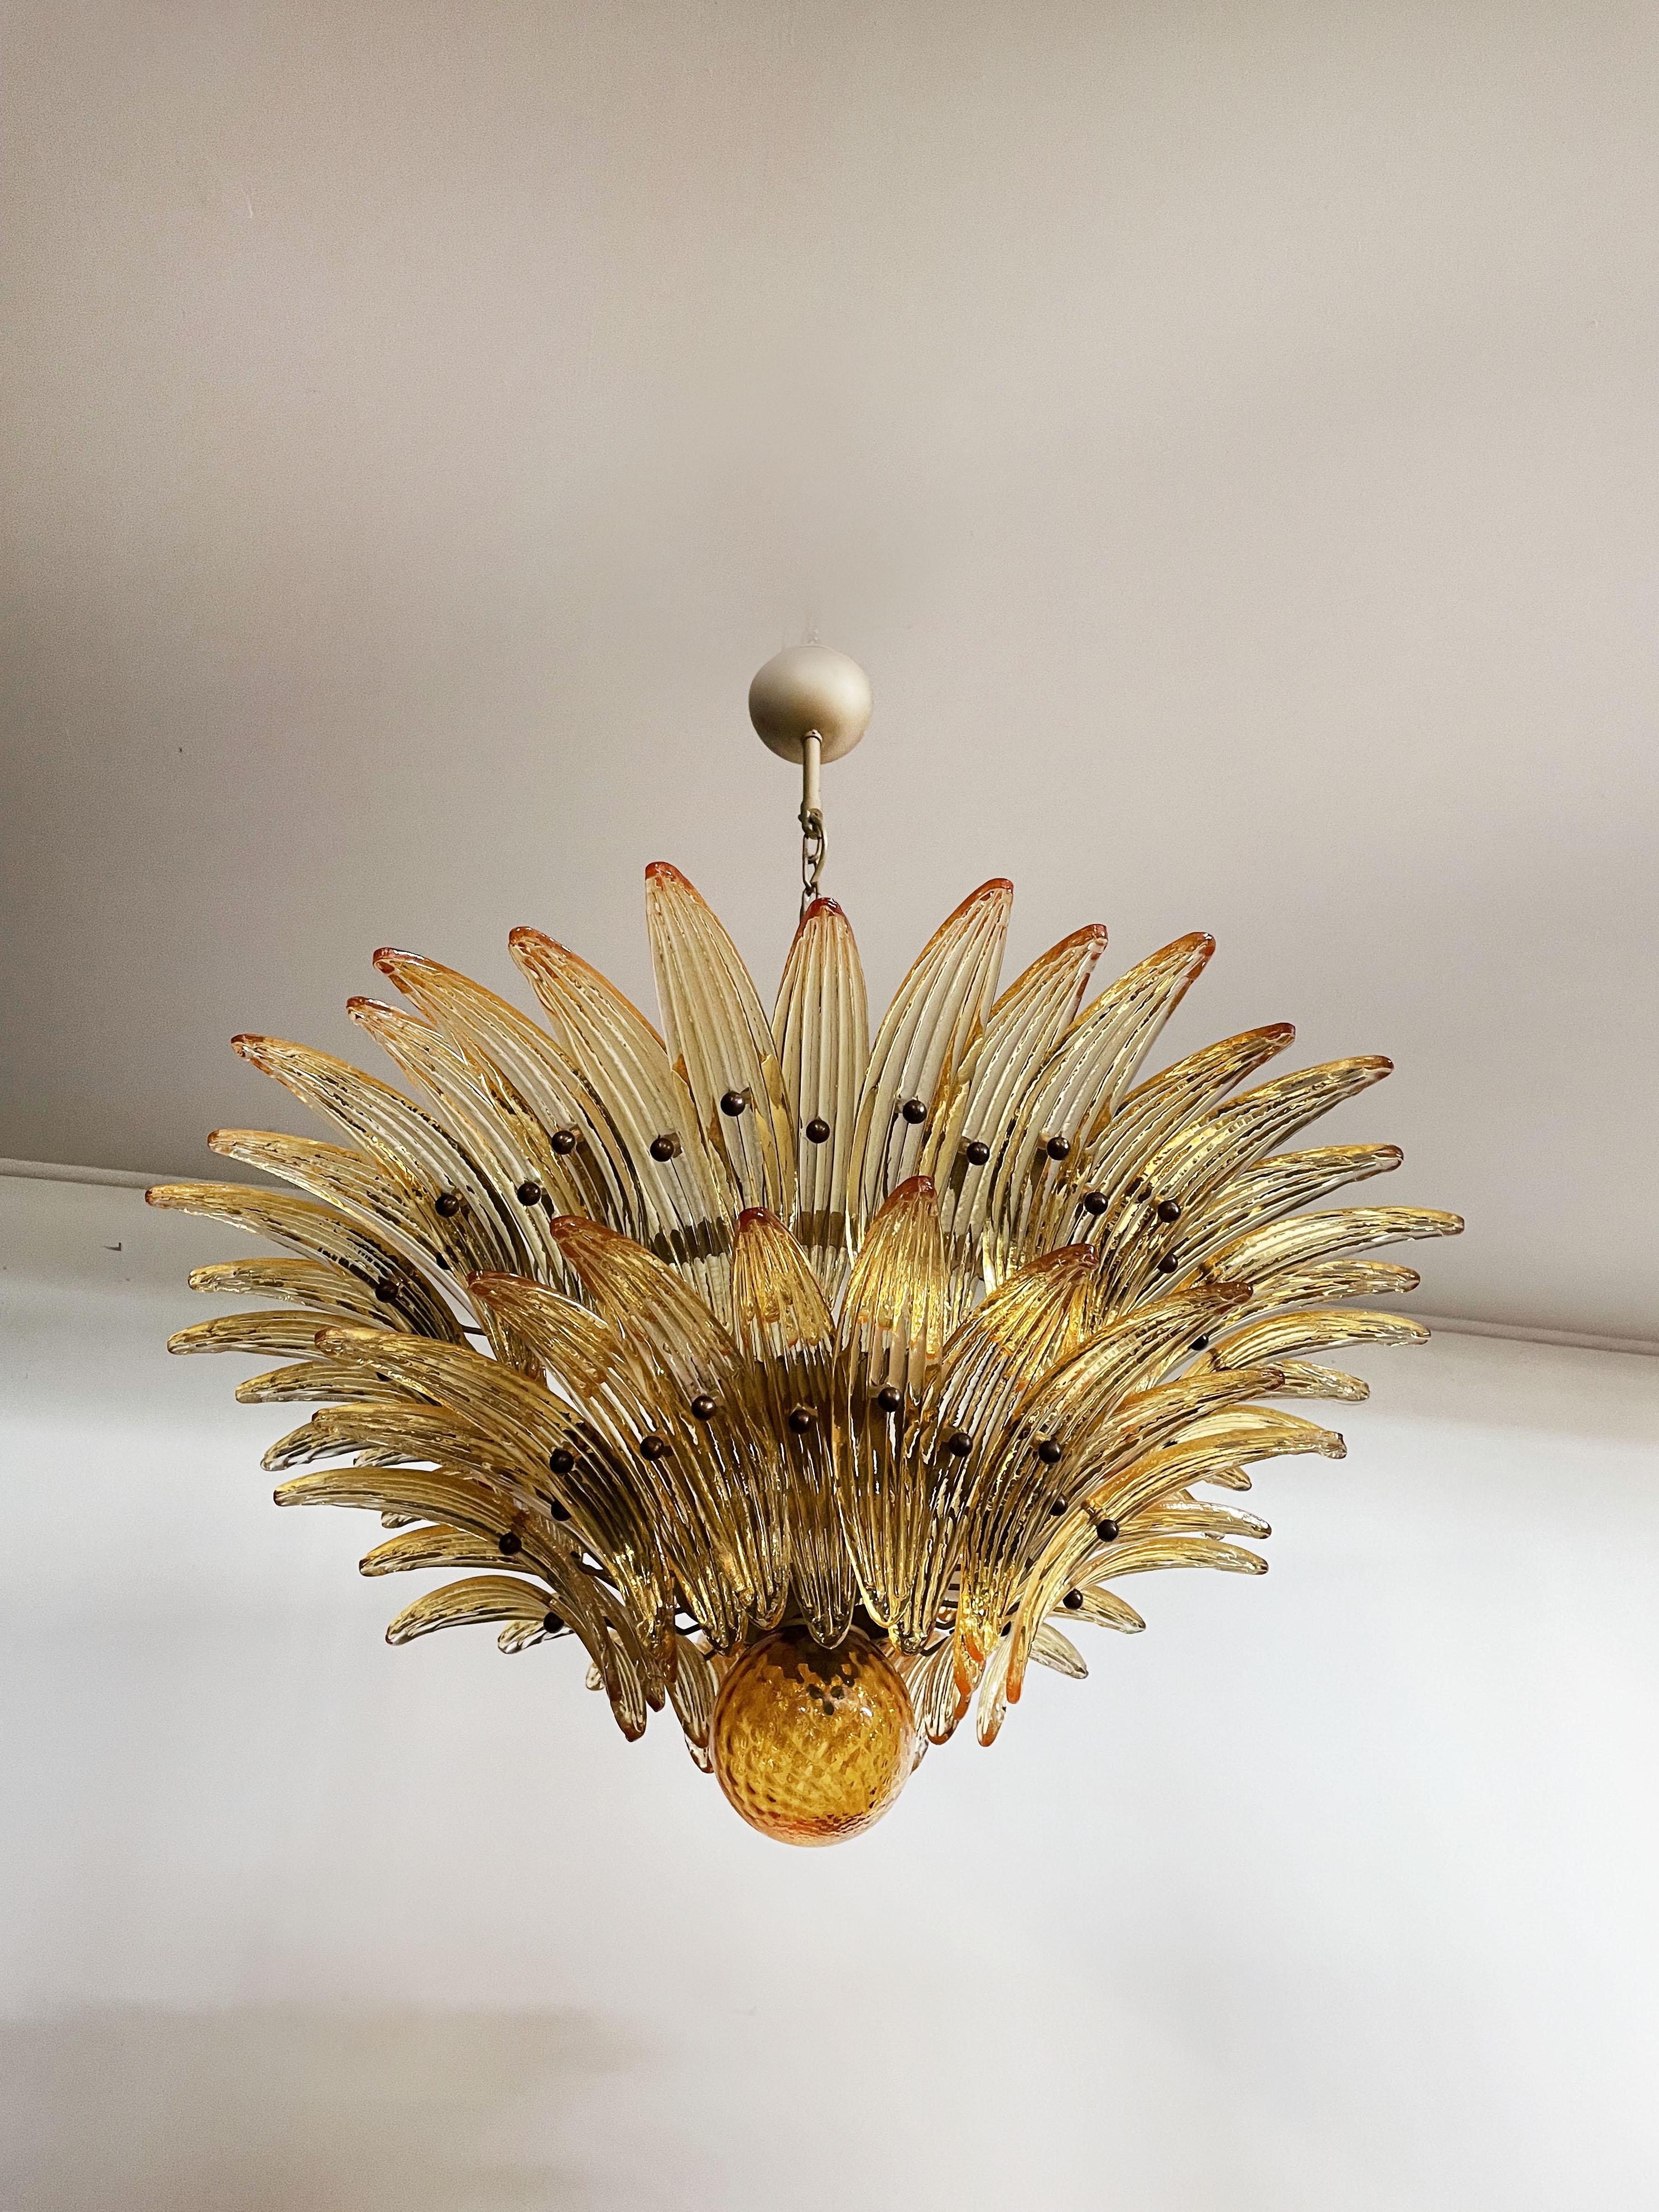 Luxury and GENUINE Murano Glass chandelier. HAND MADE IN MURANO. It made by 58 Murano amber glasses in a gold metal frame.  The chandelier has also a Murano glass ball in the end of the lamp. Murano blown glass in a traditional way.
Period: late XX